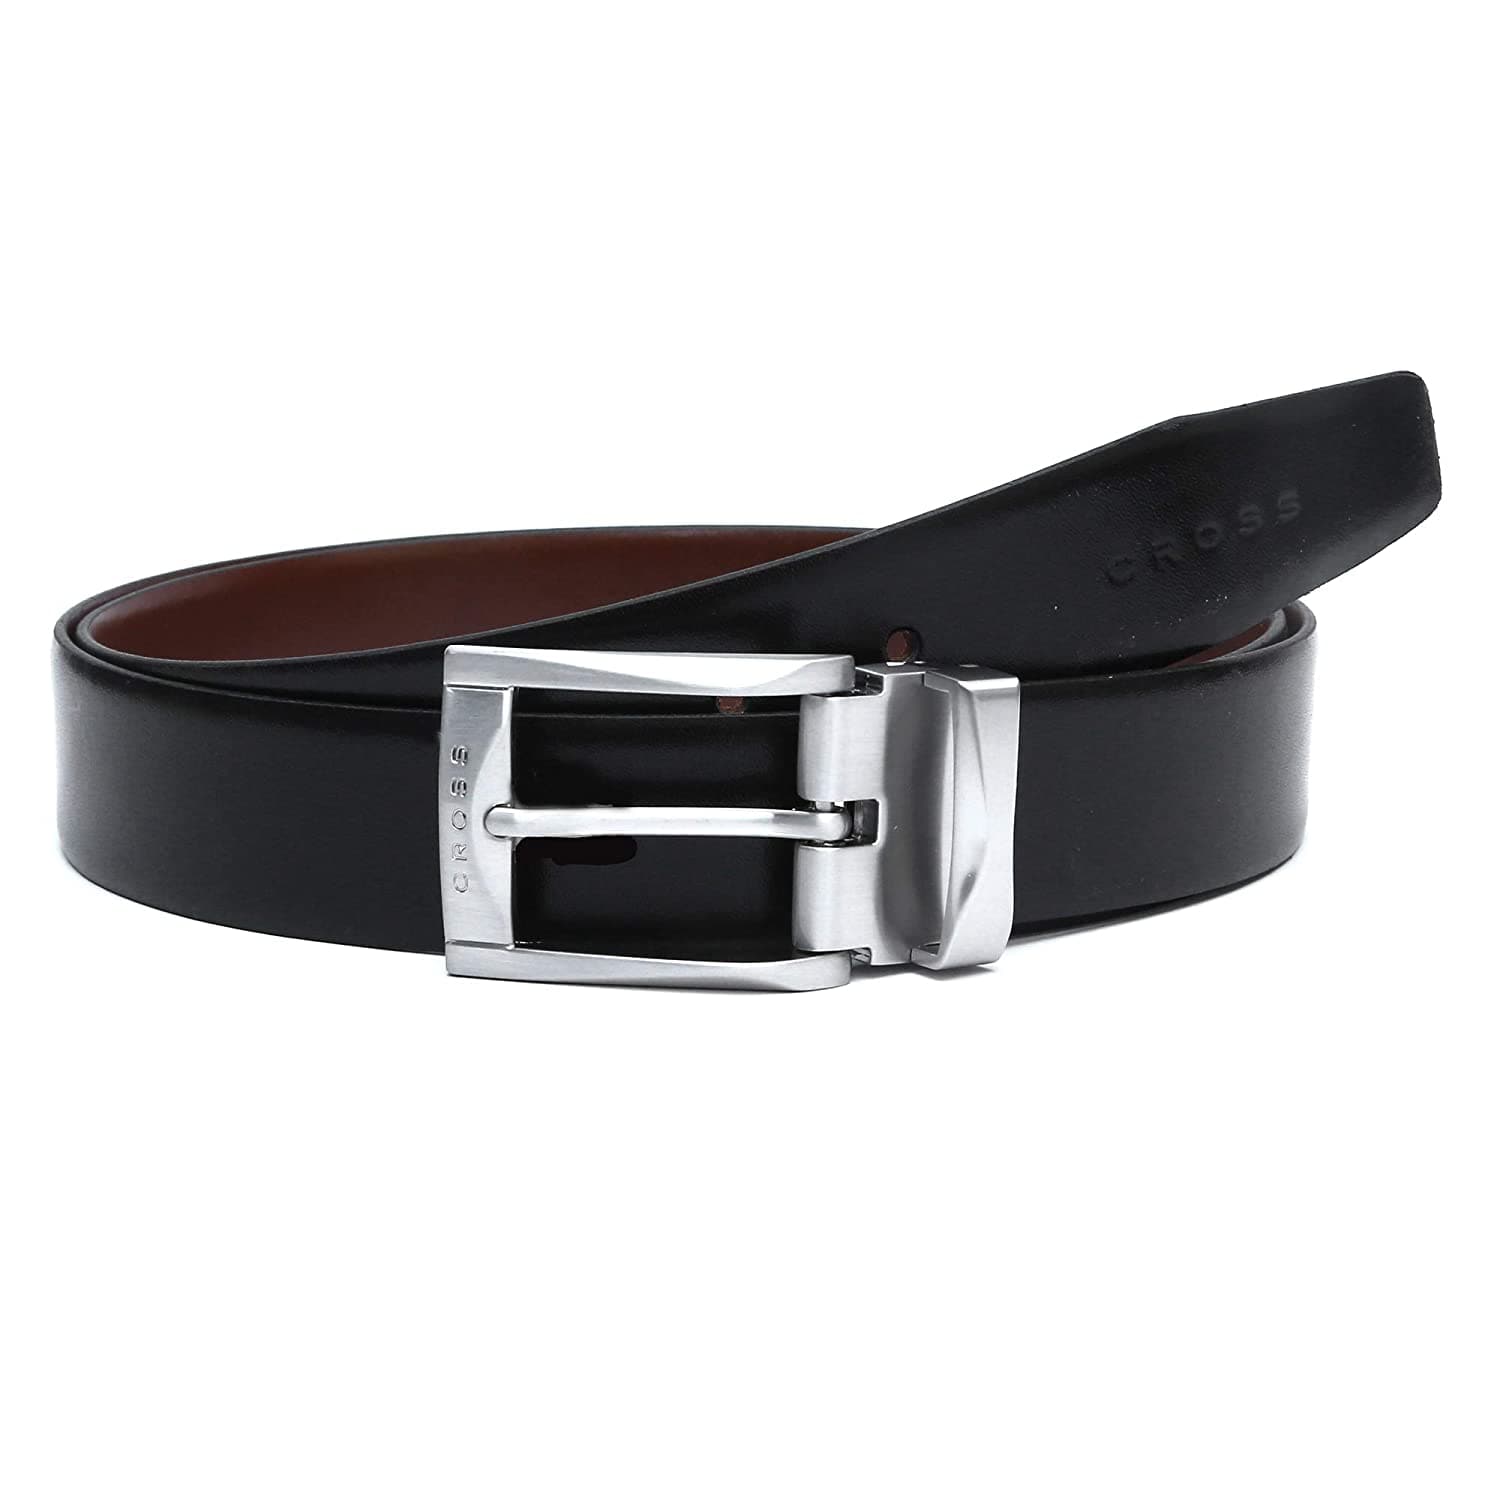 CROSS MEISTER PREMIUM LEATHER BELT WITH 30 MM PRONGED BUCKLE FOR MEN L (92CM) - BLACK AND BROWN - AC1298194-2-L2